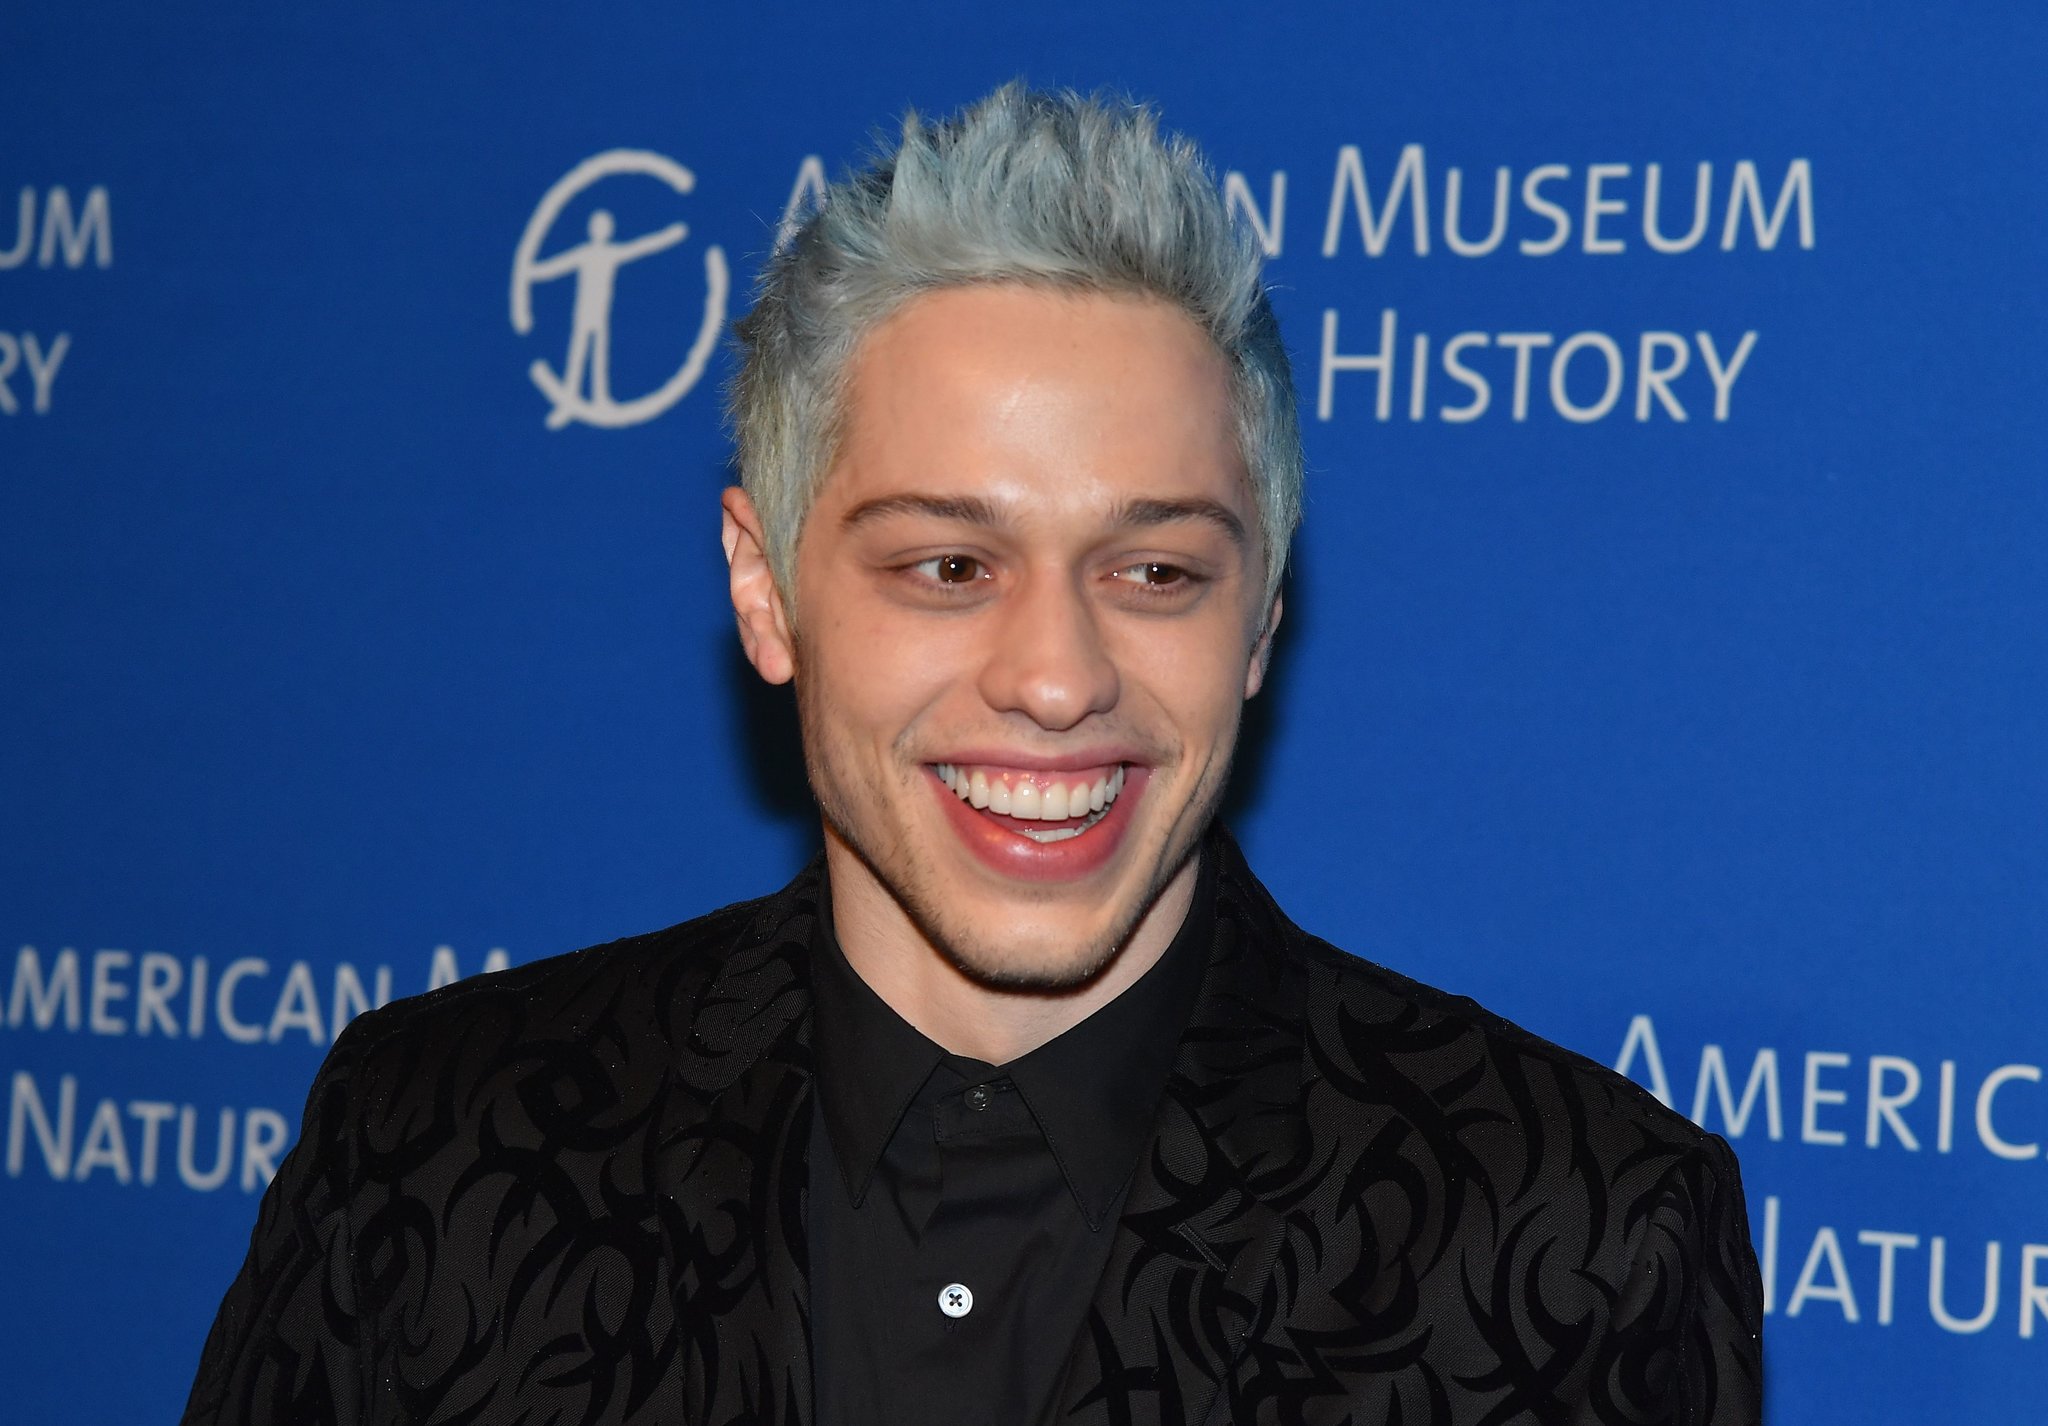 Pete Davidson Could Face Criminal Charges For Crashing Car In Beverly Hills Home